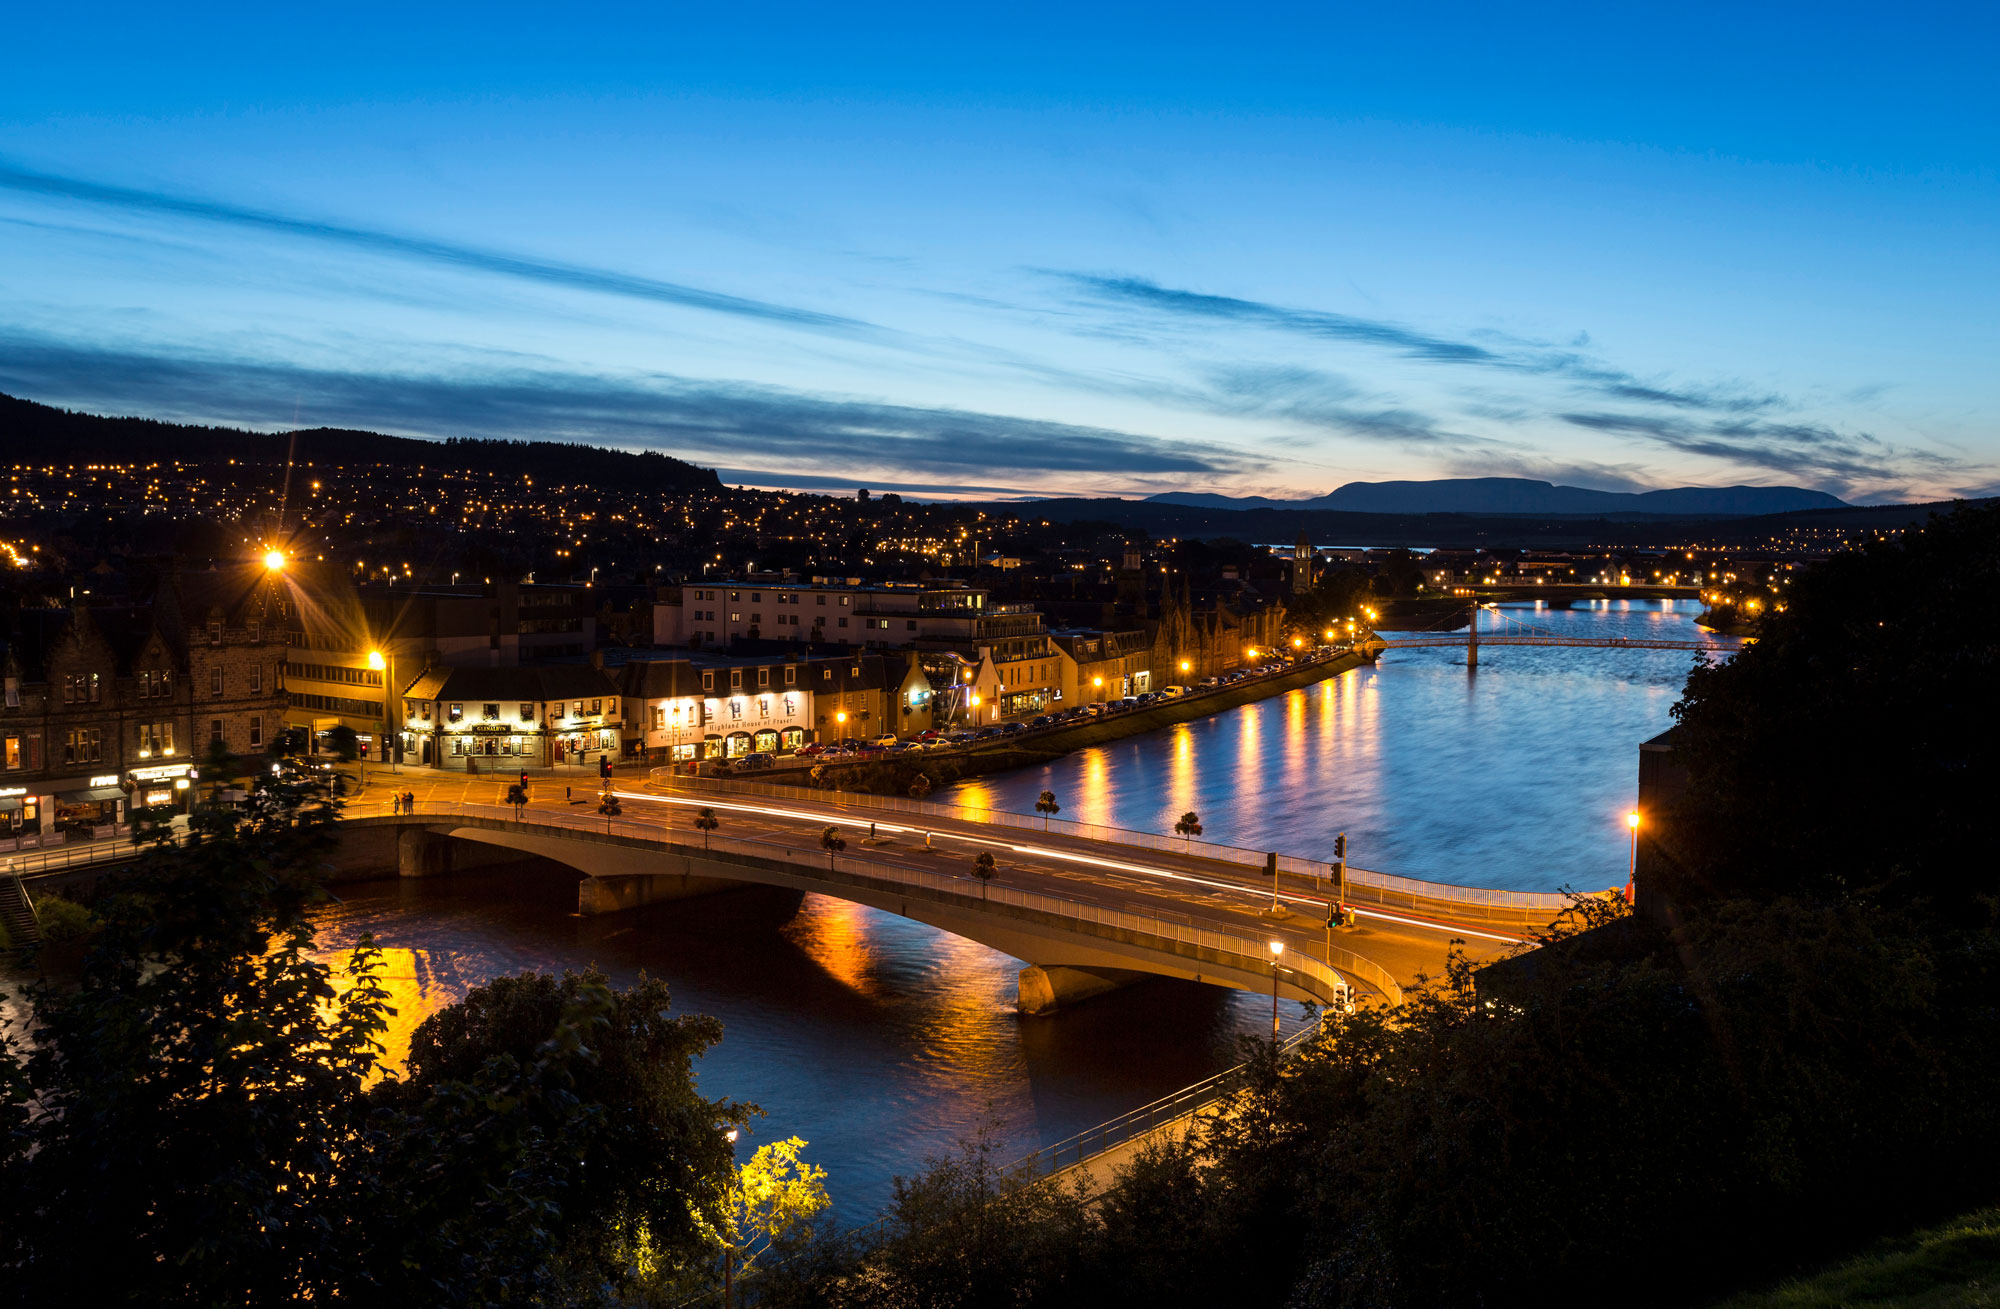 Aerial shot of Inverness lit up at night, looking across the River ness